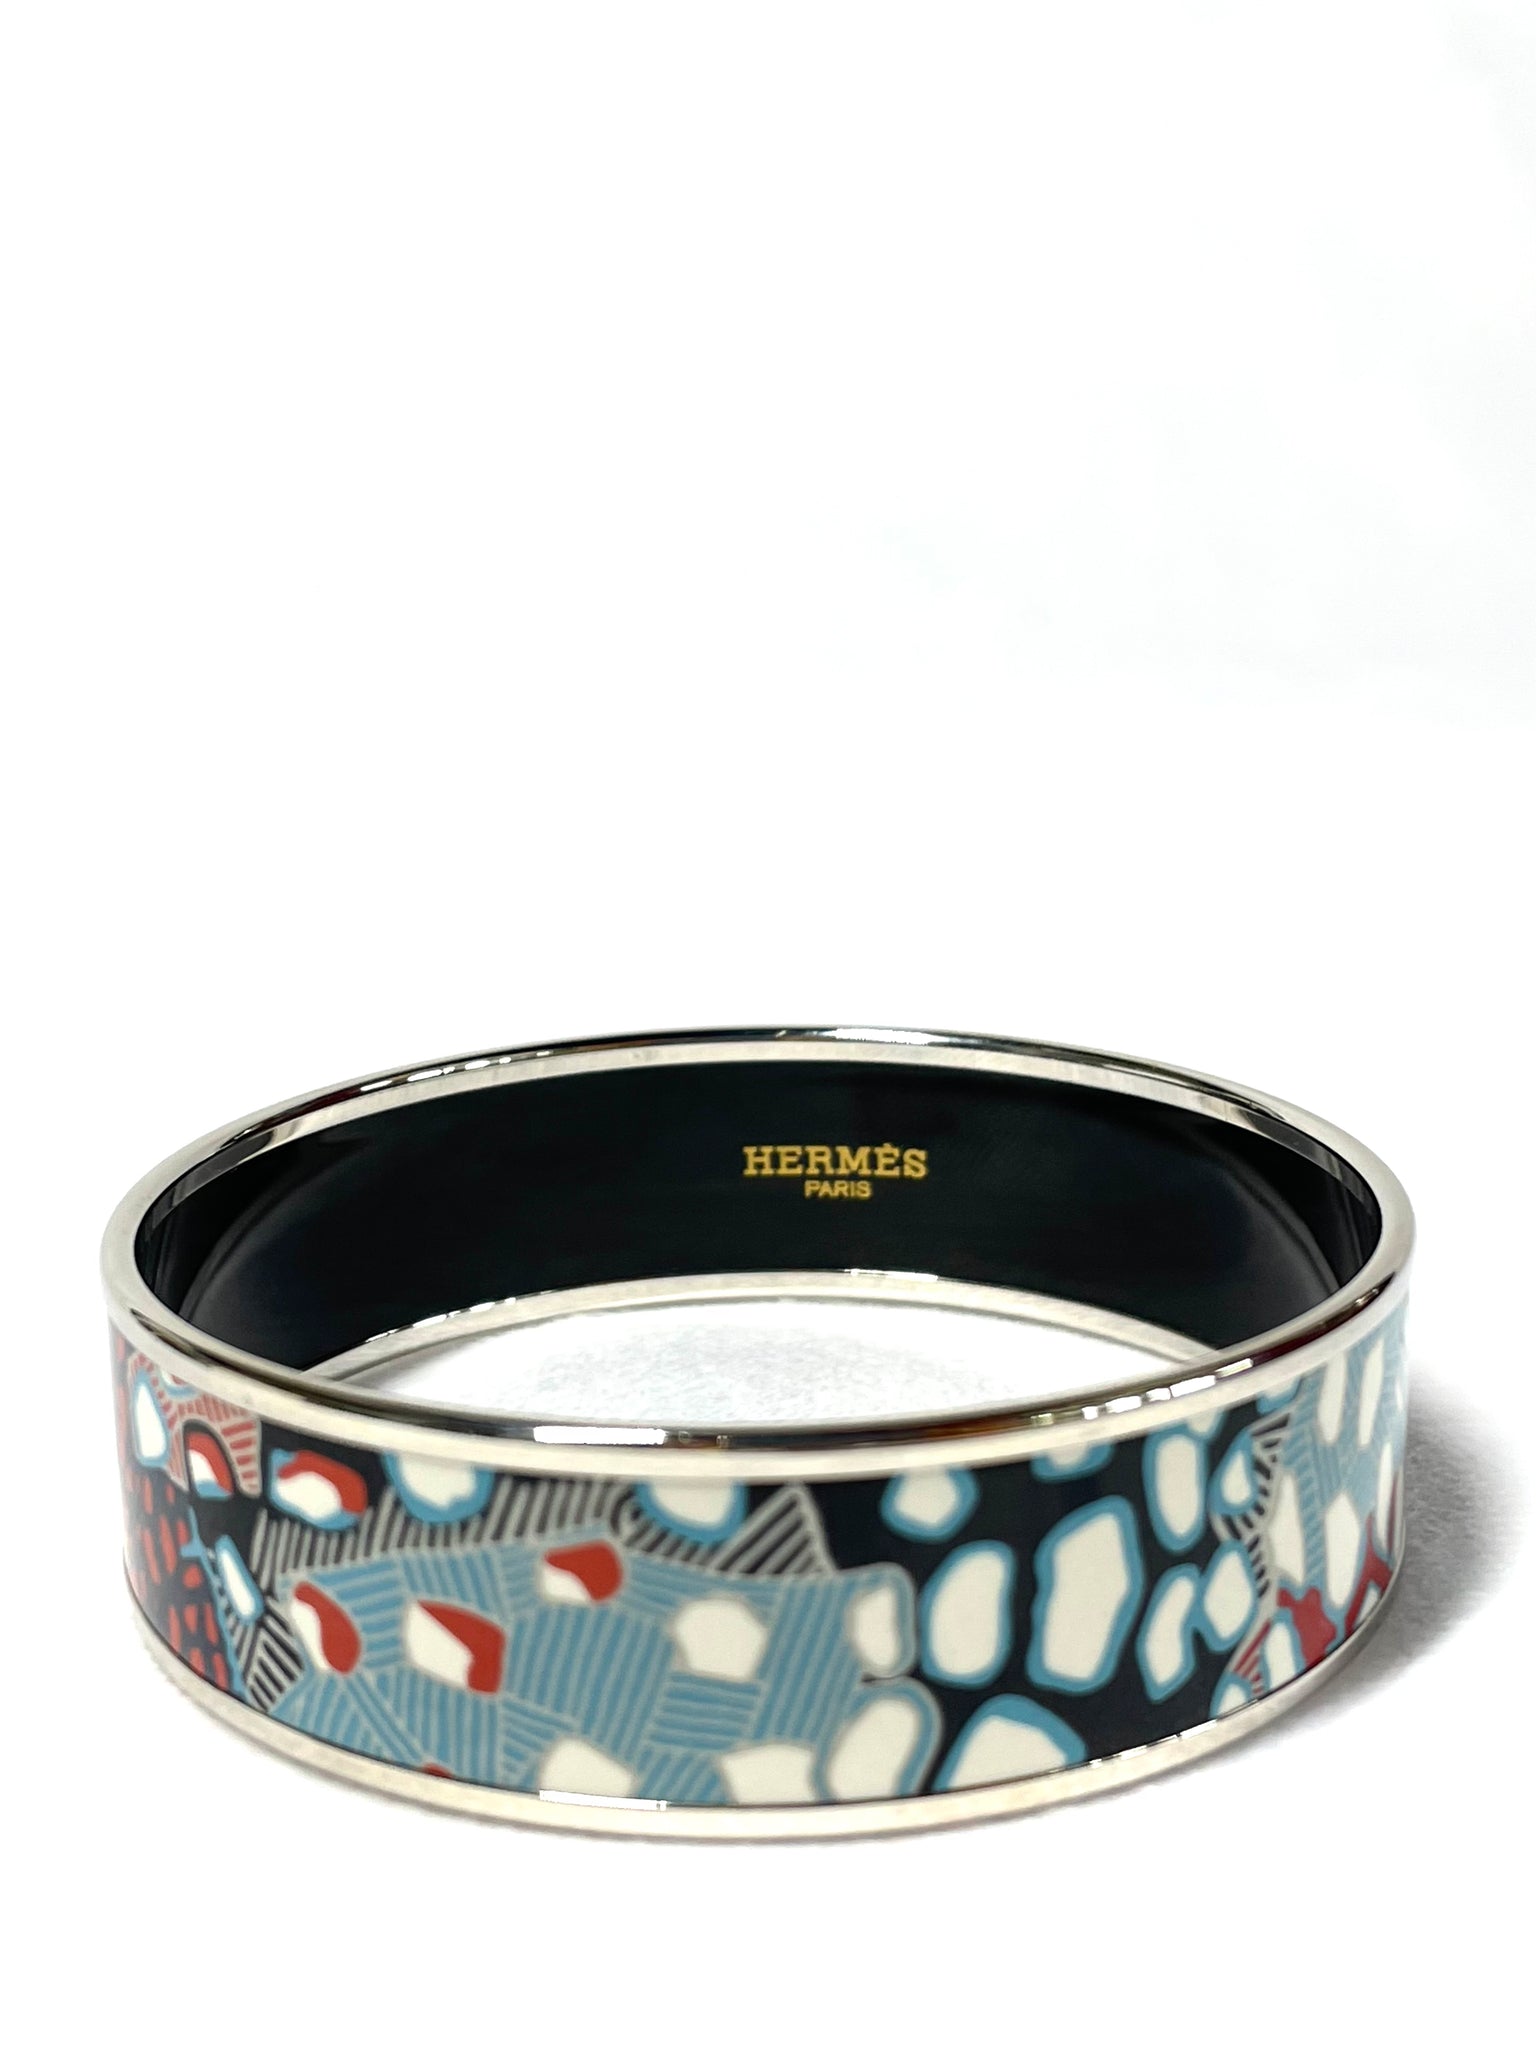 Pre Loved Hermes Animal Print Bangle in Silver available at UniKoncept in Waterloo